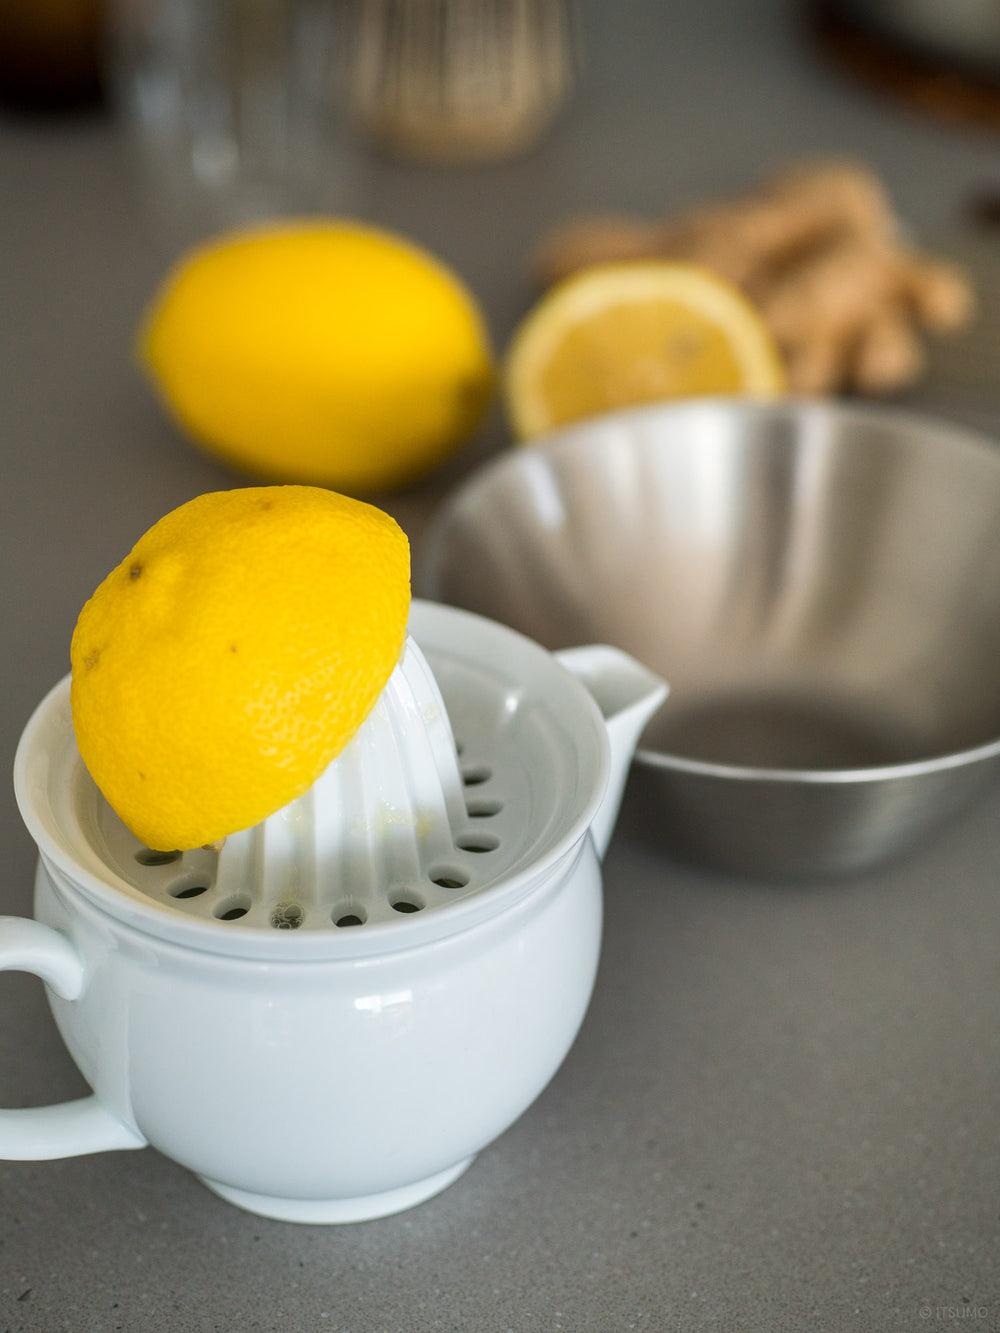 Lemons being squeezed with an Azmaya white porcelain citrus juicer